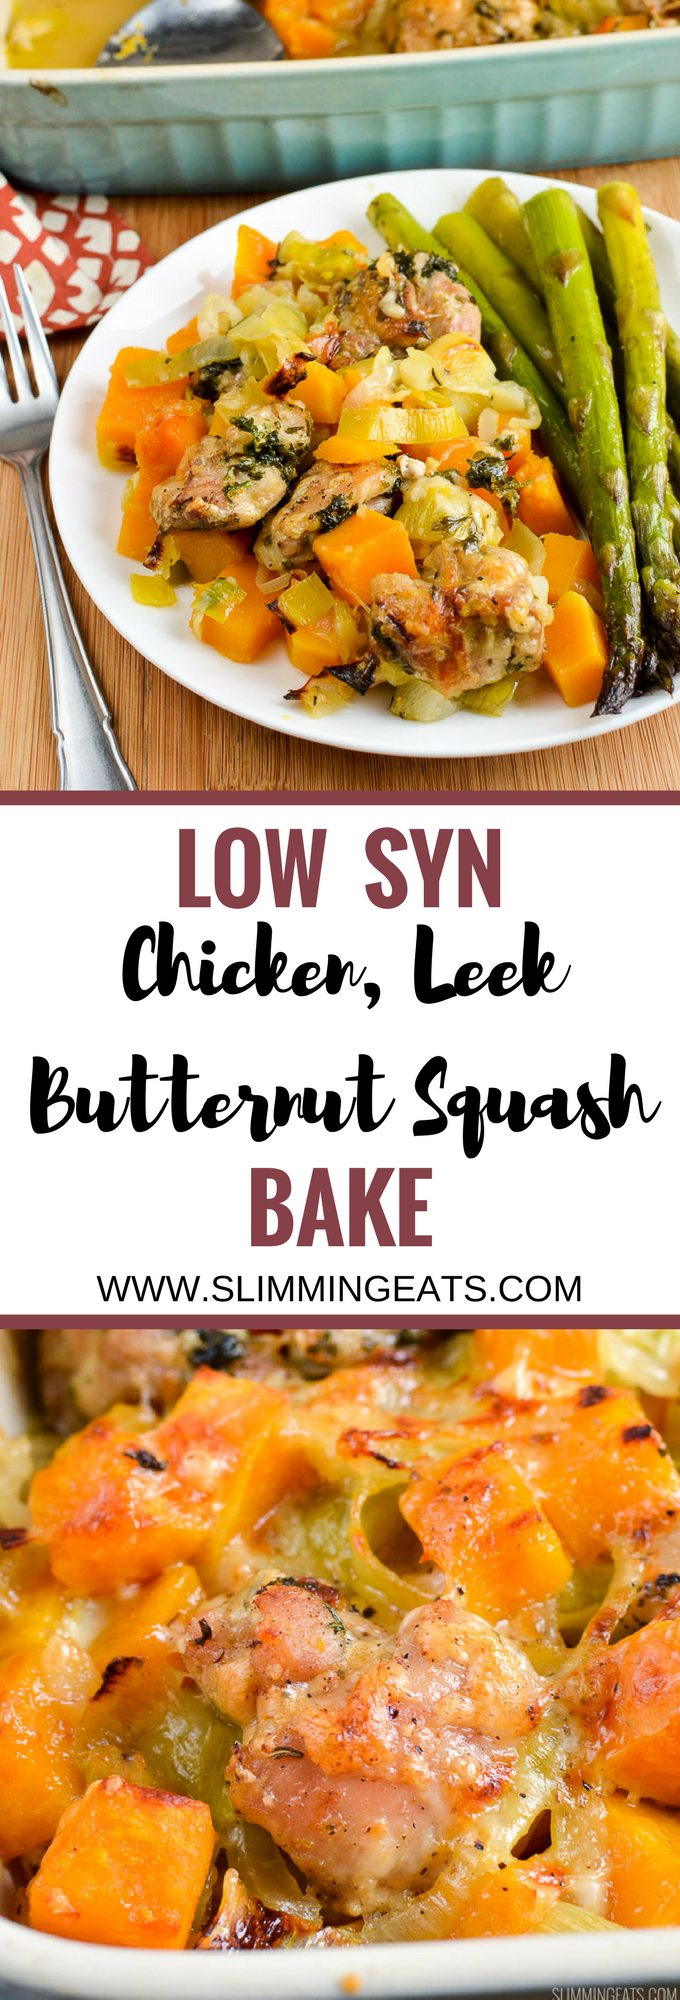 Slimming Eats Low Syn Chicken, Leek and Butternut Squash Bake - gluten free, Slimming World and Weight Watchers friendly